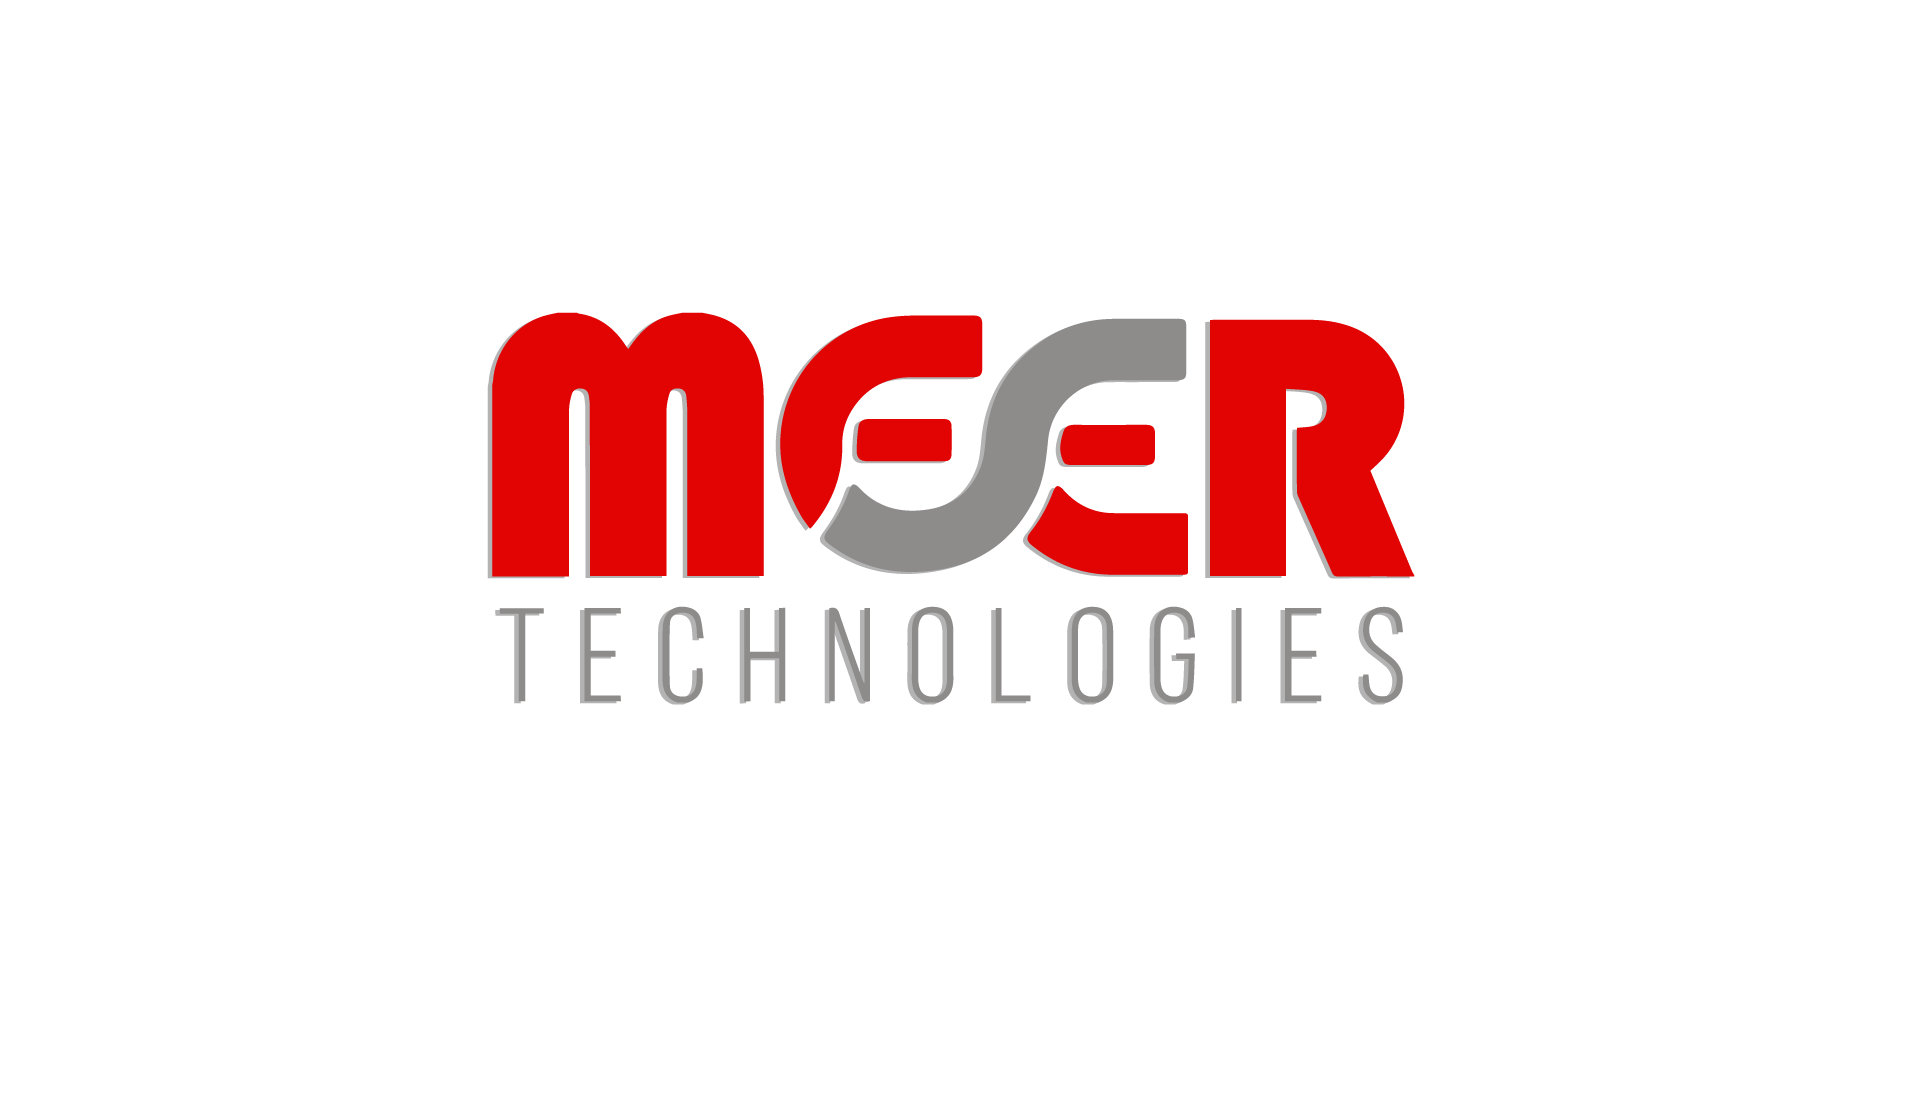 Meer Technologies LLC profile on Qualified.One